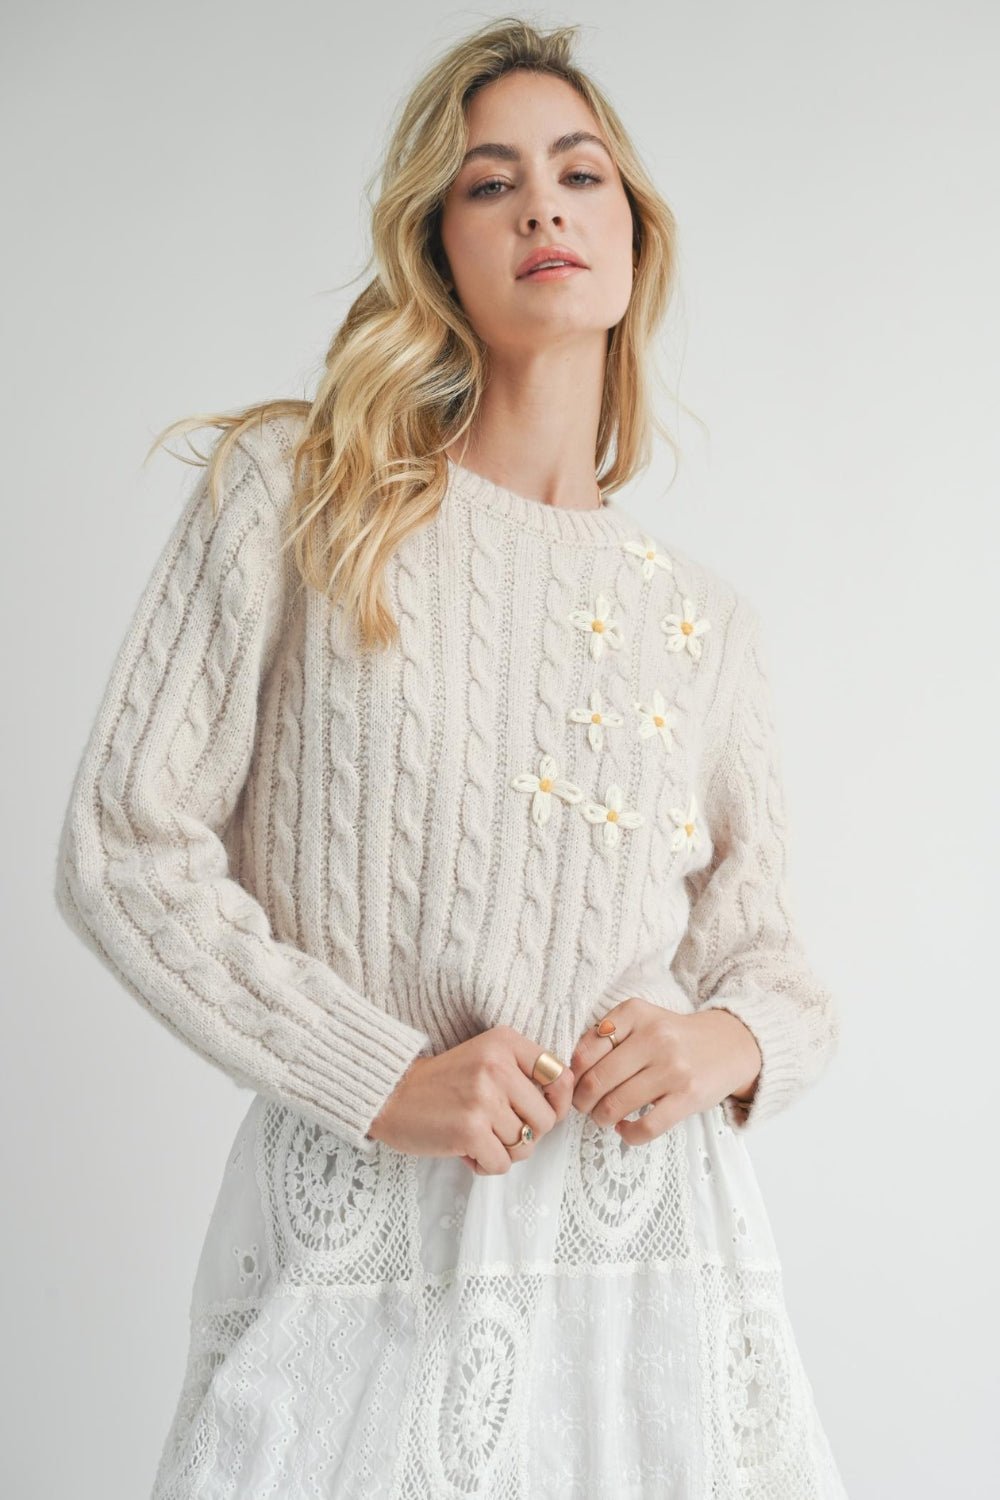 Women's Hand Embroidered Daisy Cable Knit Sweater Top | Natural Ivory - Women's Shirts & Tops - Blooming Daily